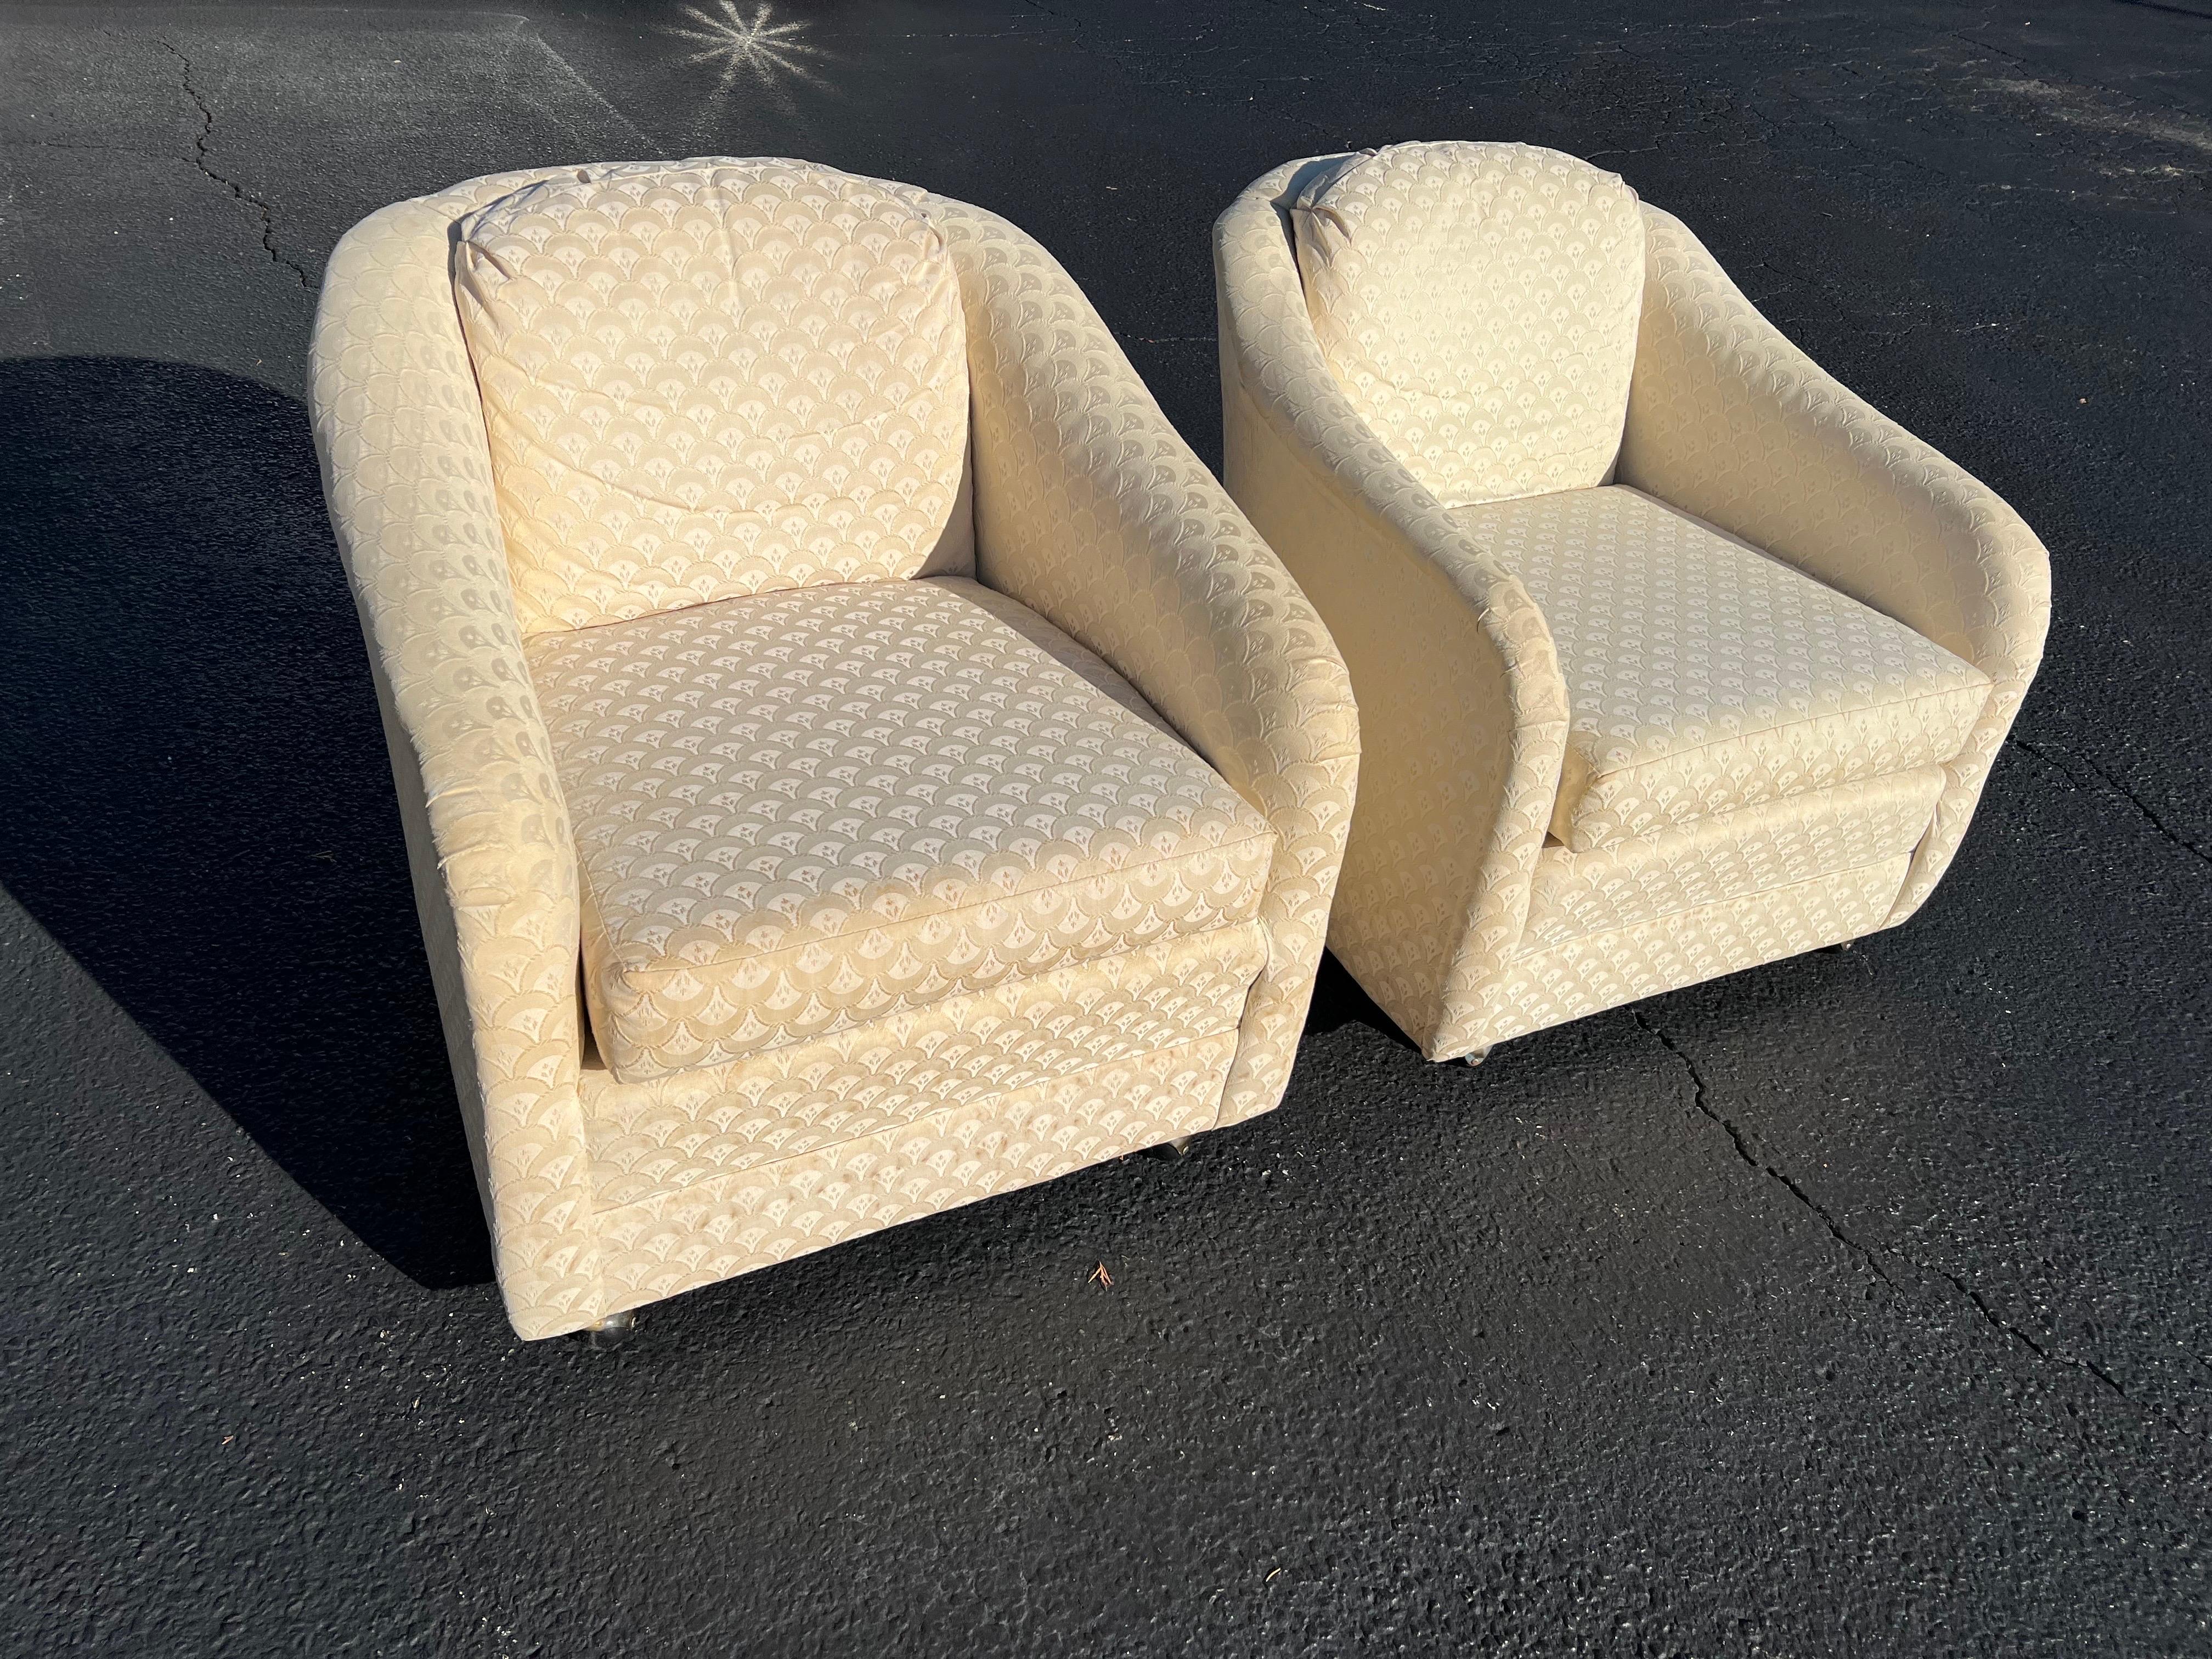 Pair of Mid-Century Modern club chairs on castors. Nice neutral shaped cream chairs in a chevron design upholstery. Solid well built cube chairs. Probably could use a recover. Some slight stains. 
Measure: Seat depth is 21